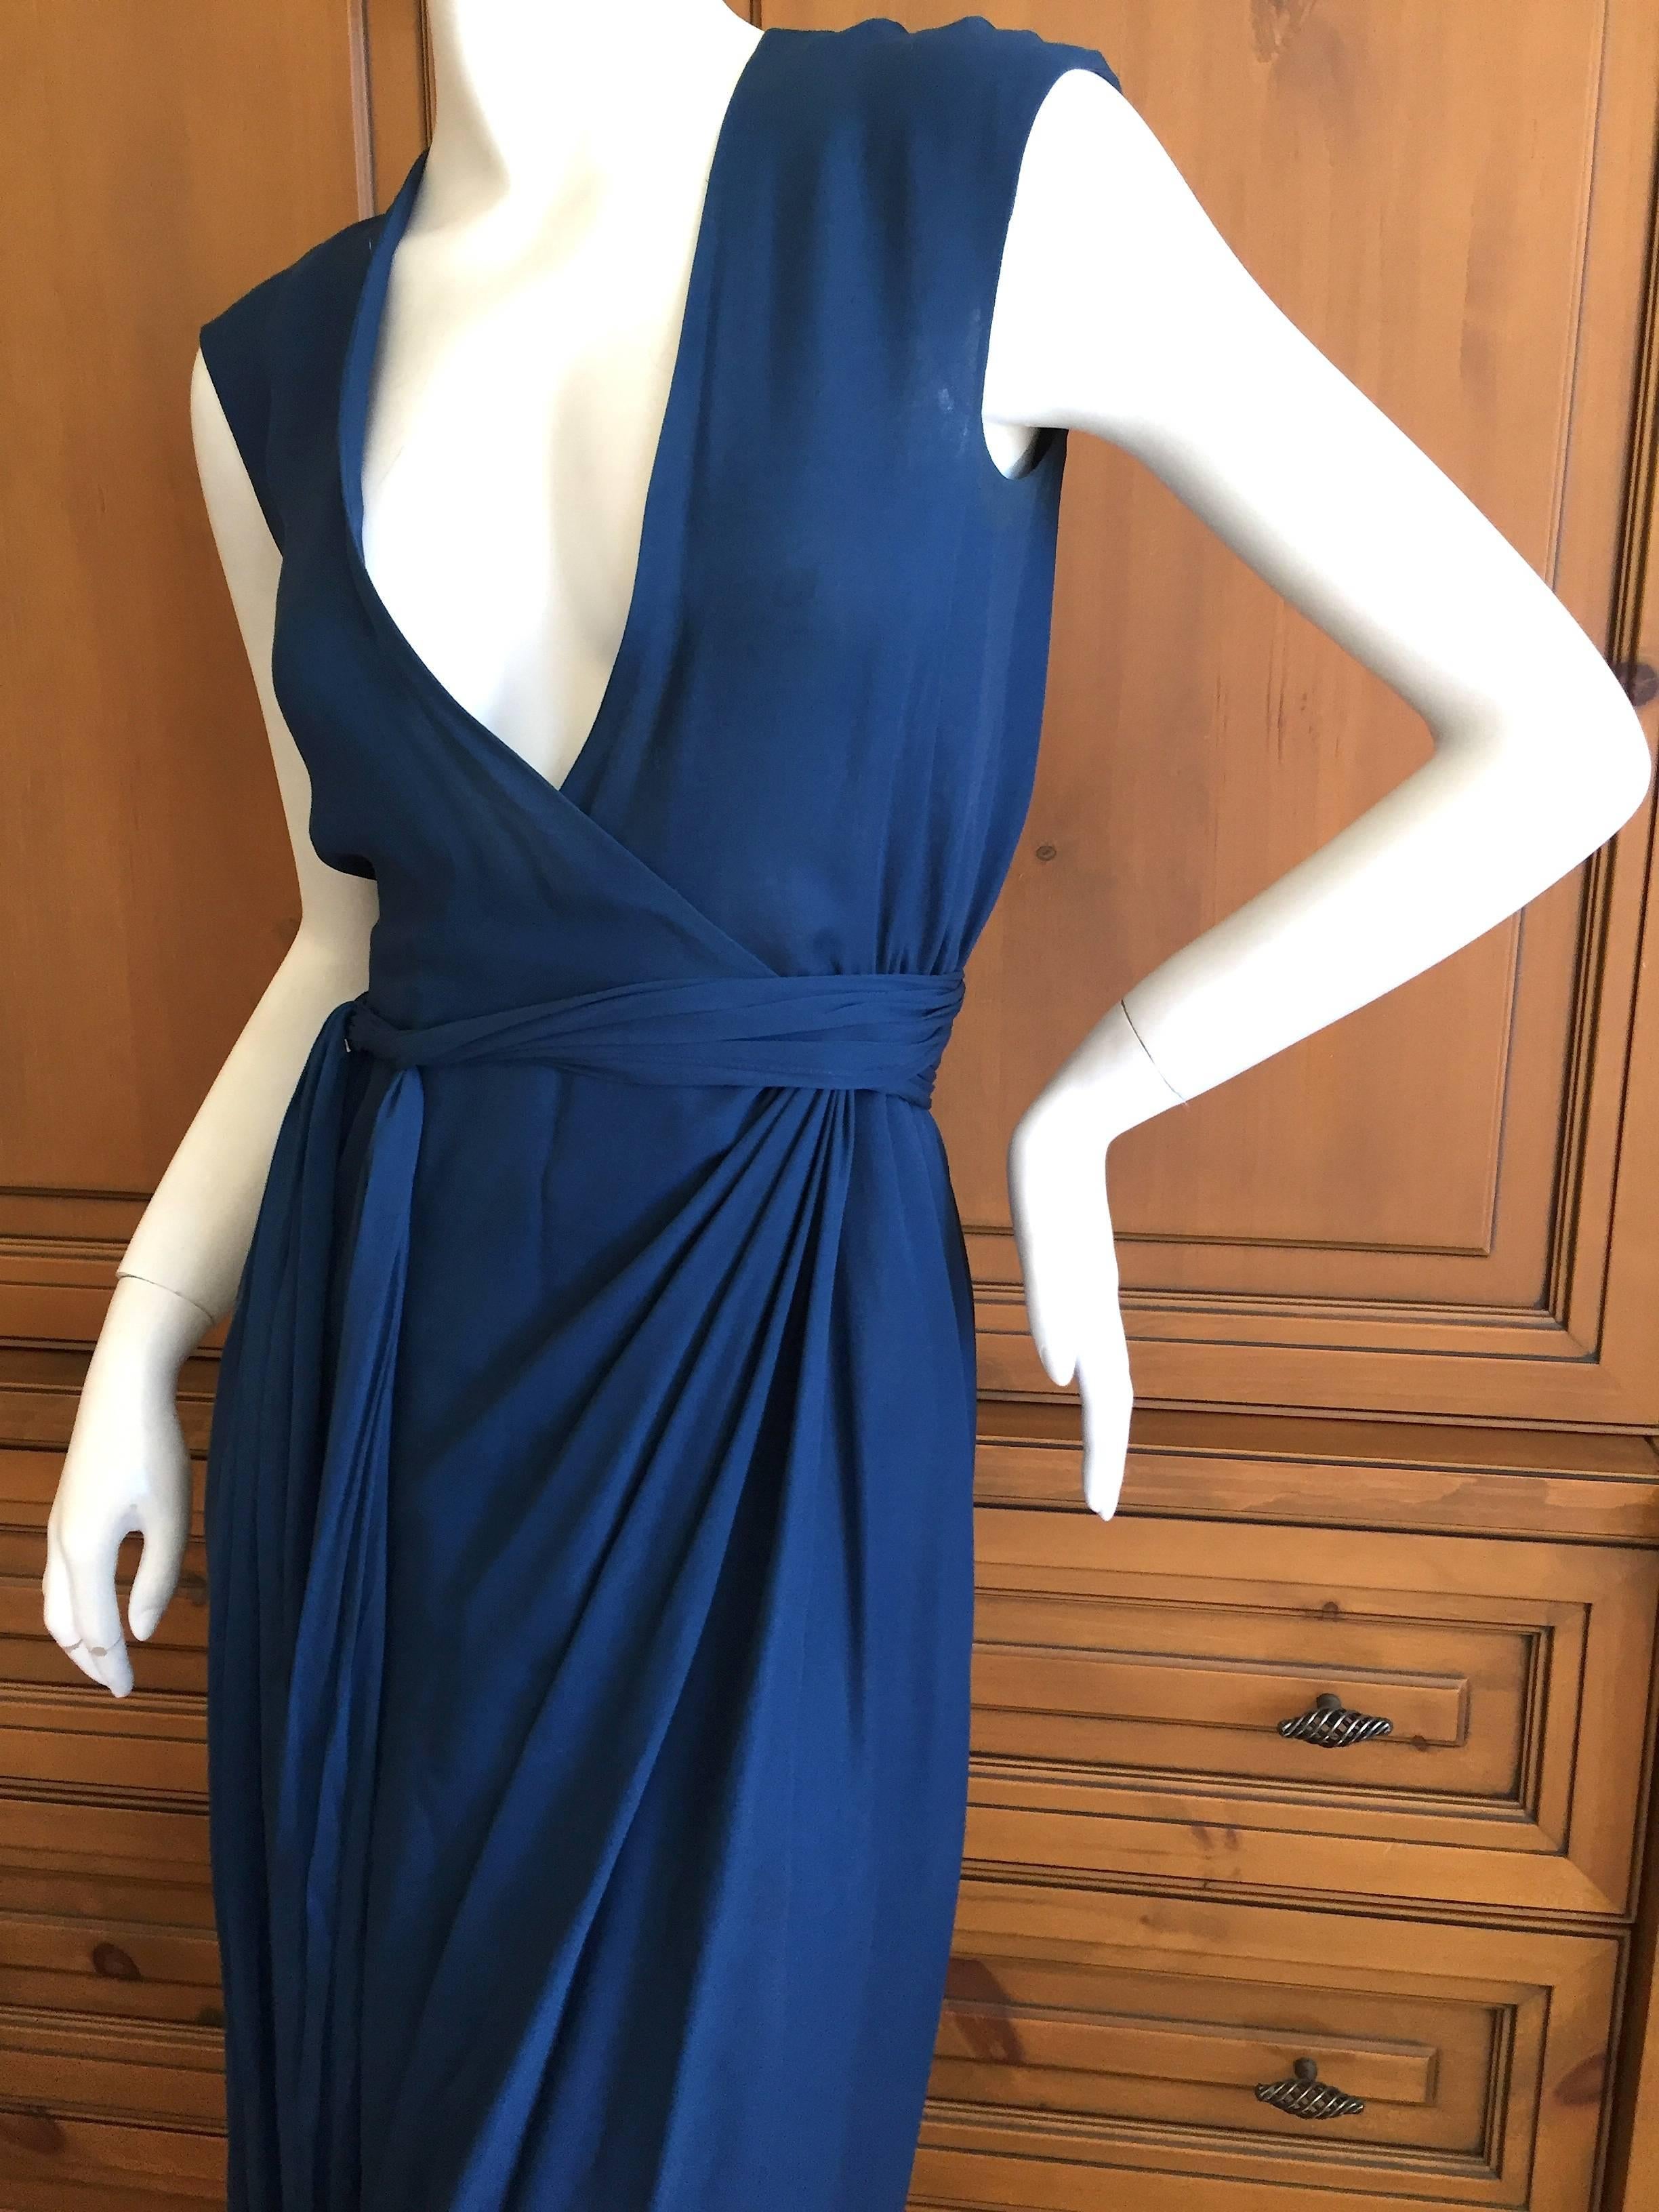 Wonderful 1970's Navy blue wrap dress from Halston.
Deceptively simple, with delicate draped details flowing from the waist.
The genius of Halston was his ability to render such sublime simplicity with his fabrics. Simply chic, Simply sexy, Pure